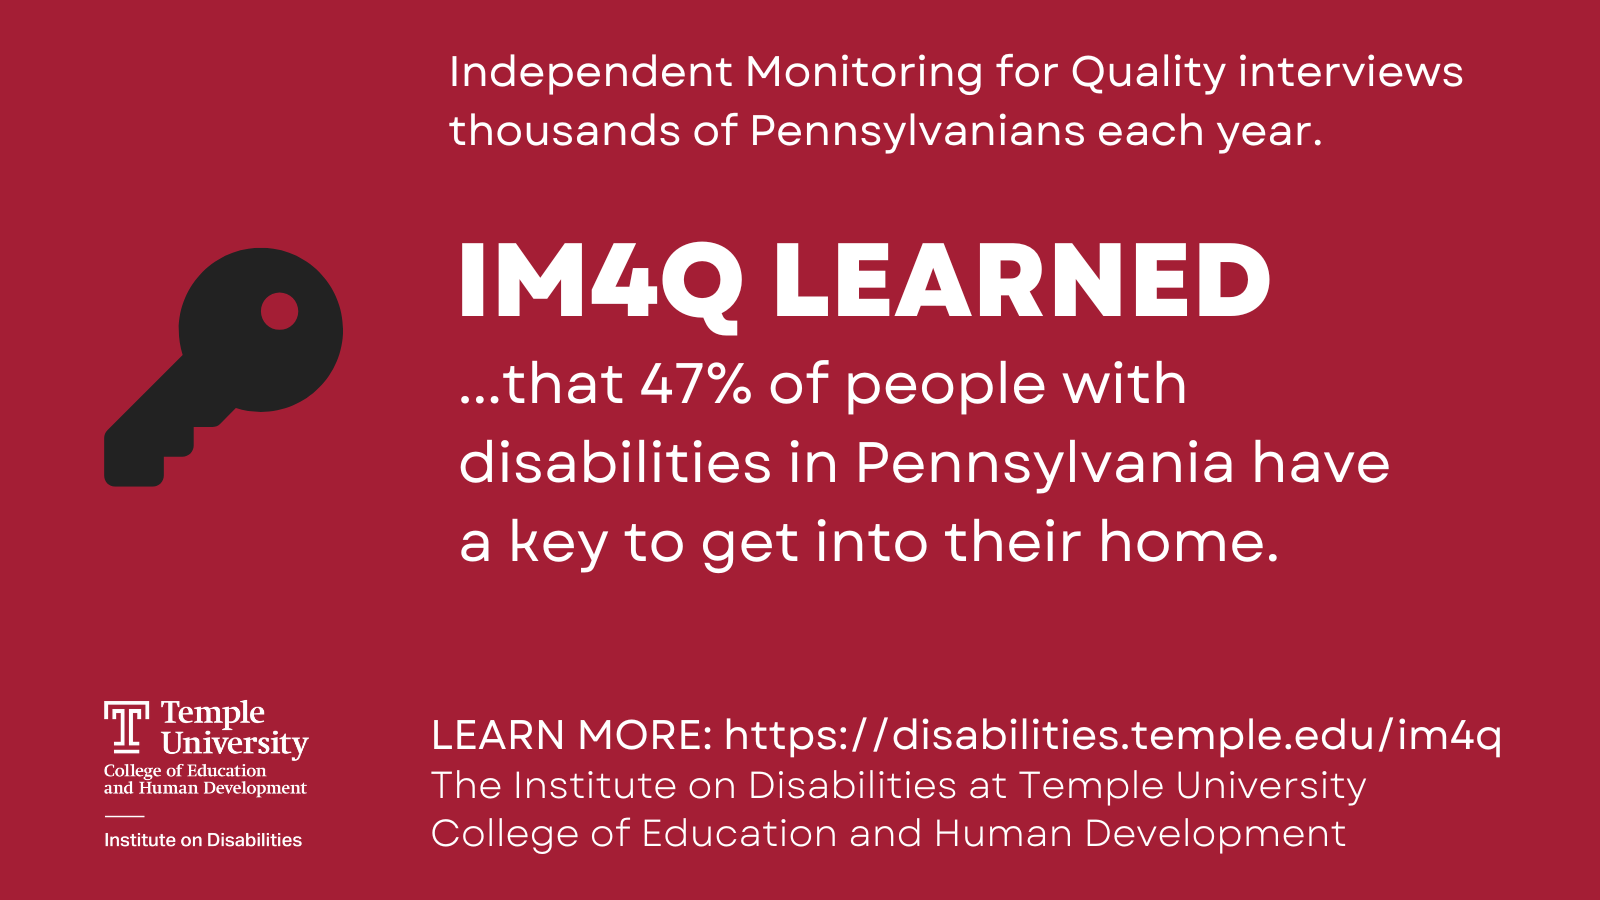 47% of people with disabilities in Pennsylvania have a key to get into their home.